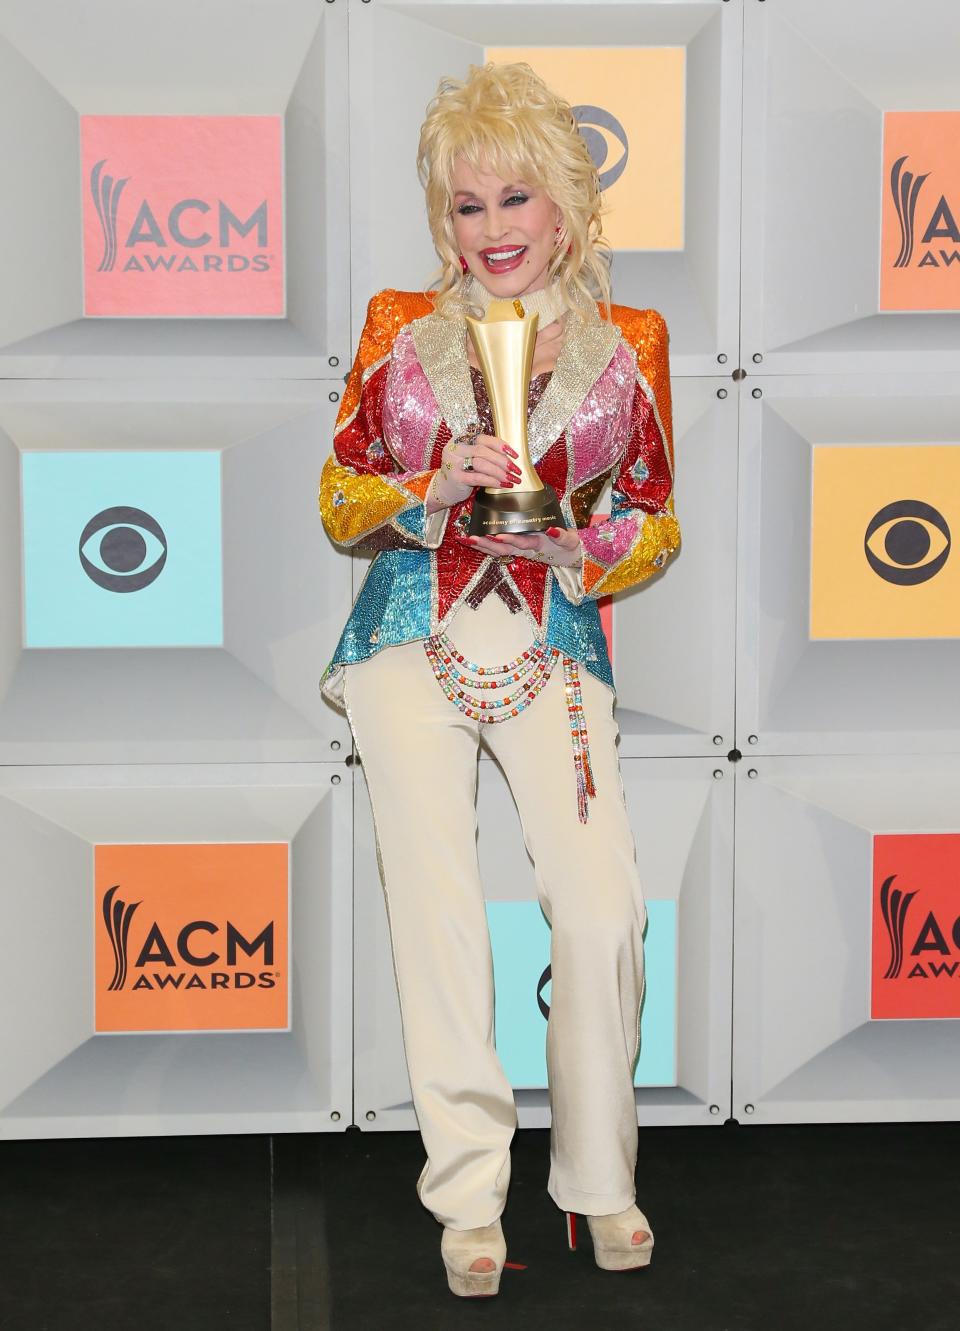 LAS VEGAS, NEVADA - APRIL 03: Dolly Parton poses in the press room during the 51st Academy of Country Music Awards at MGM Grand Garden Arena on April 3, 2016 in Las Vegas, Nevada. (Photo by JB Lacroix/WireImage)